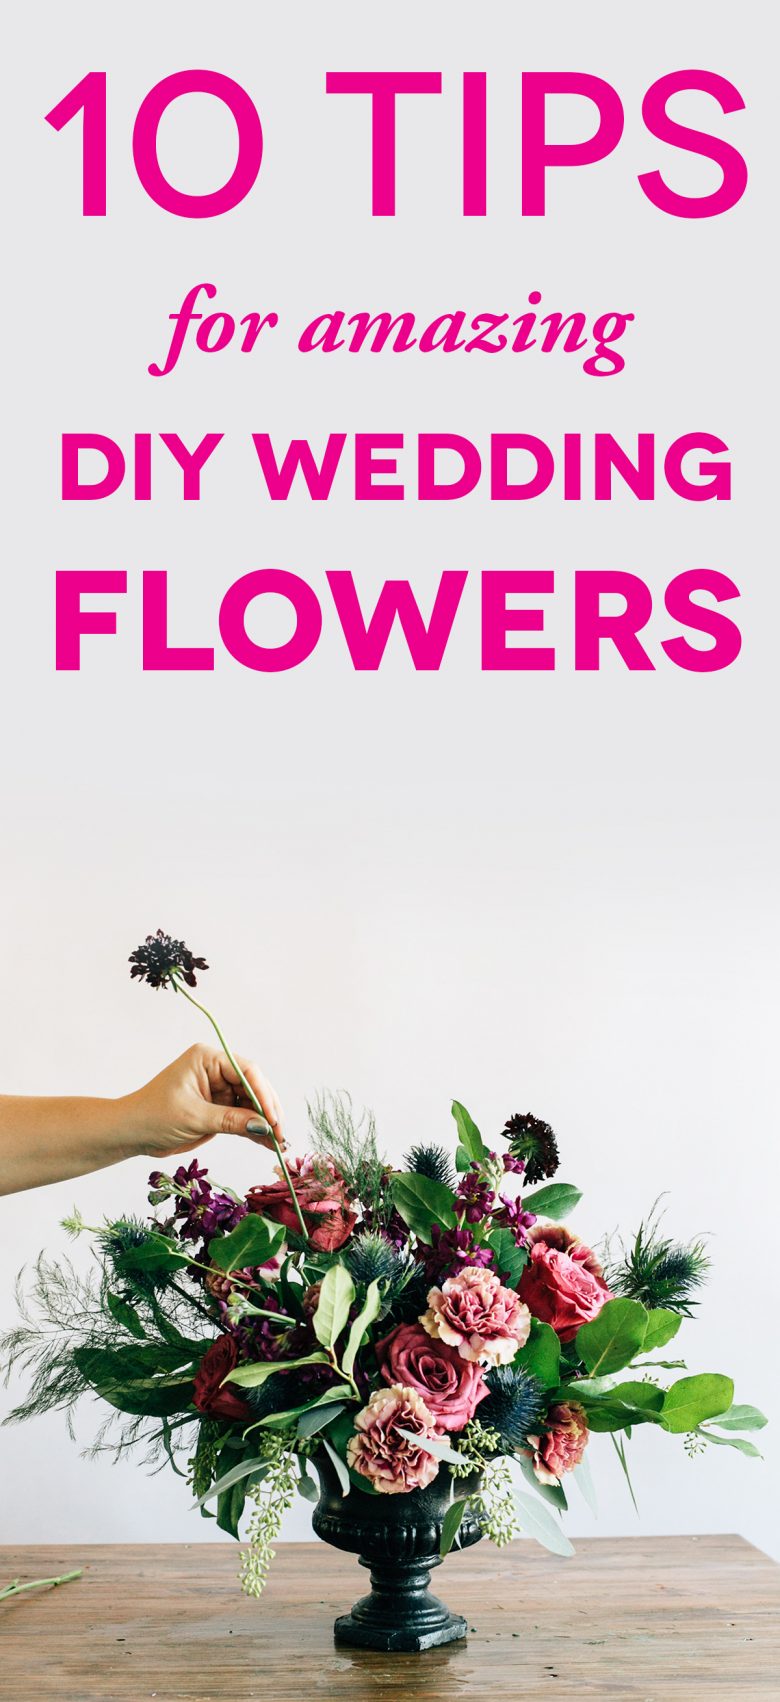 picture of someone arranging flowers with text "tips for DIY wedding flowers"